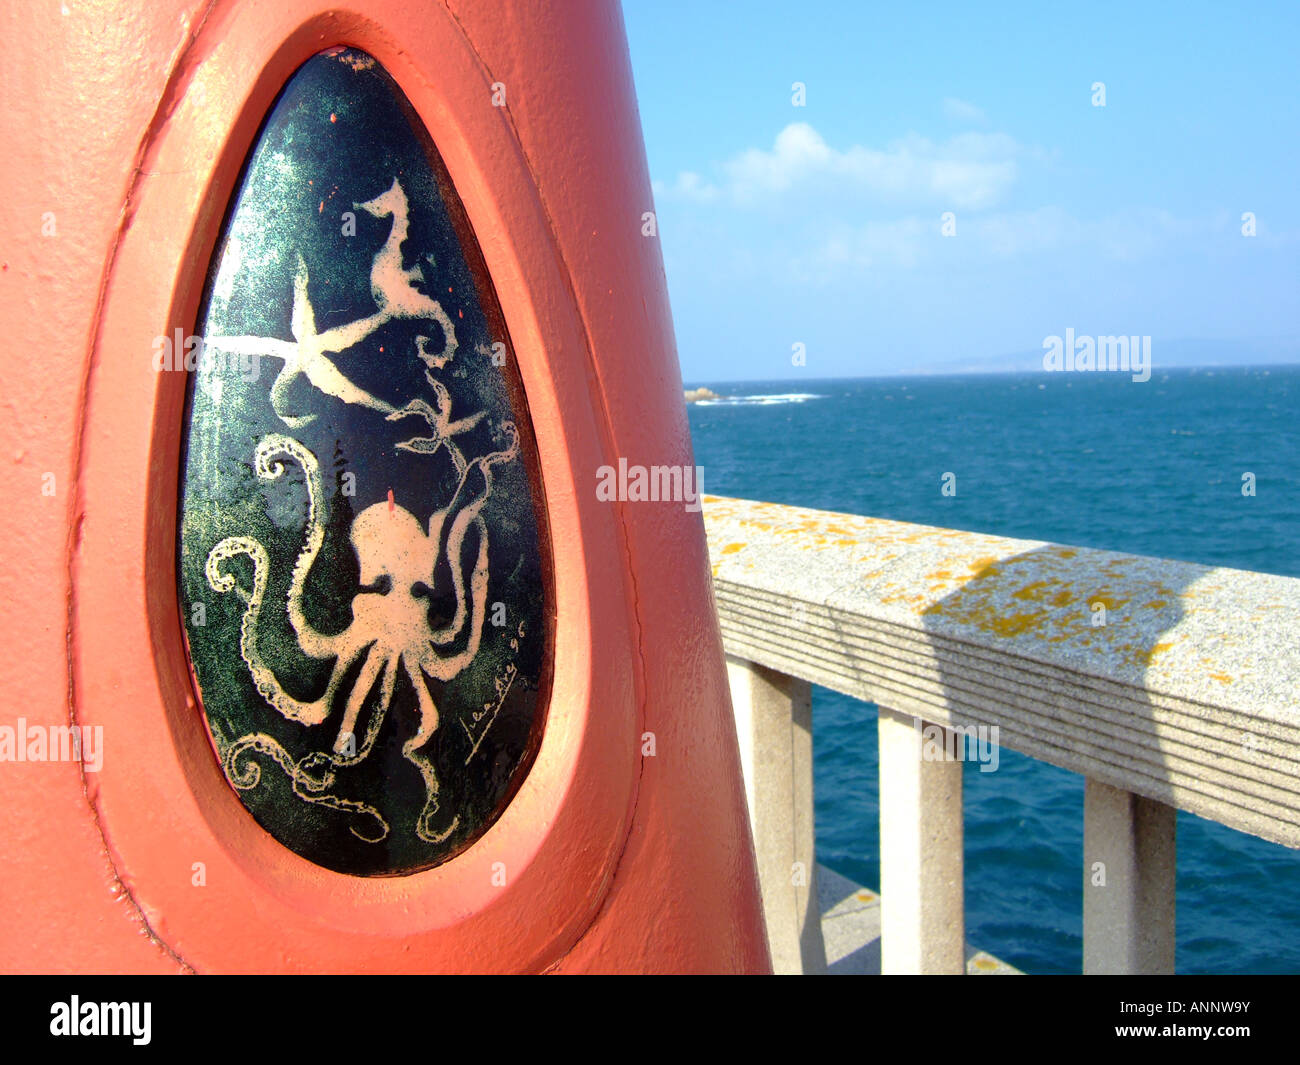 Lamp post bearing an image of 'Pulpo', Octopus which is the famous local dish in Galicia, Northern Spain. Stock Photo